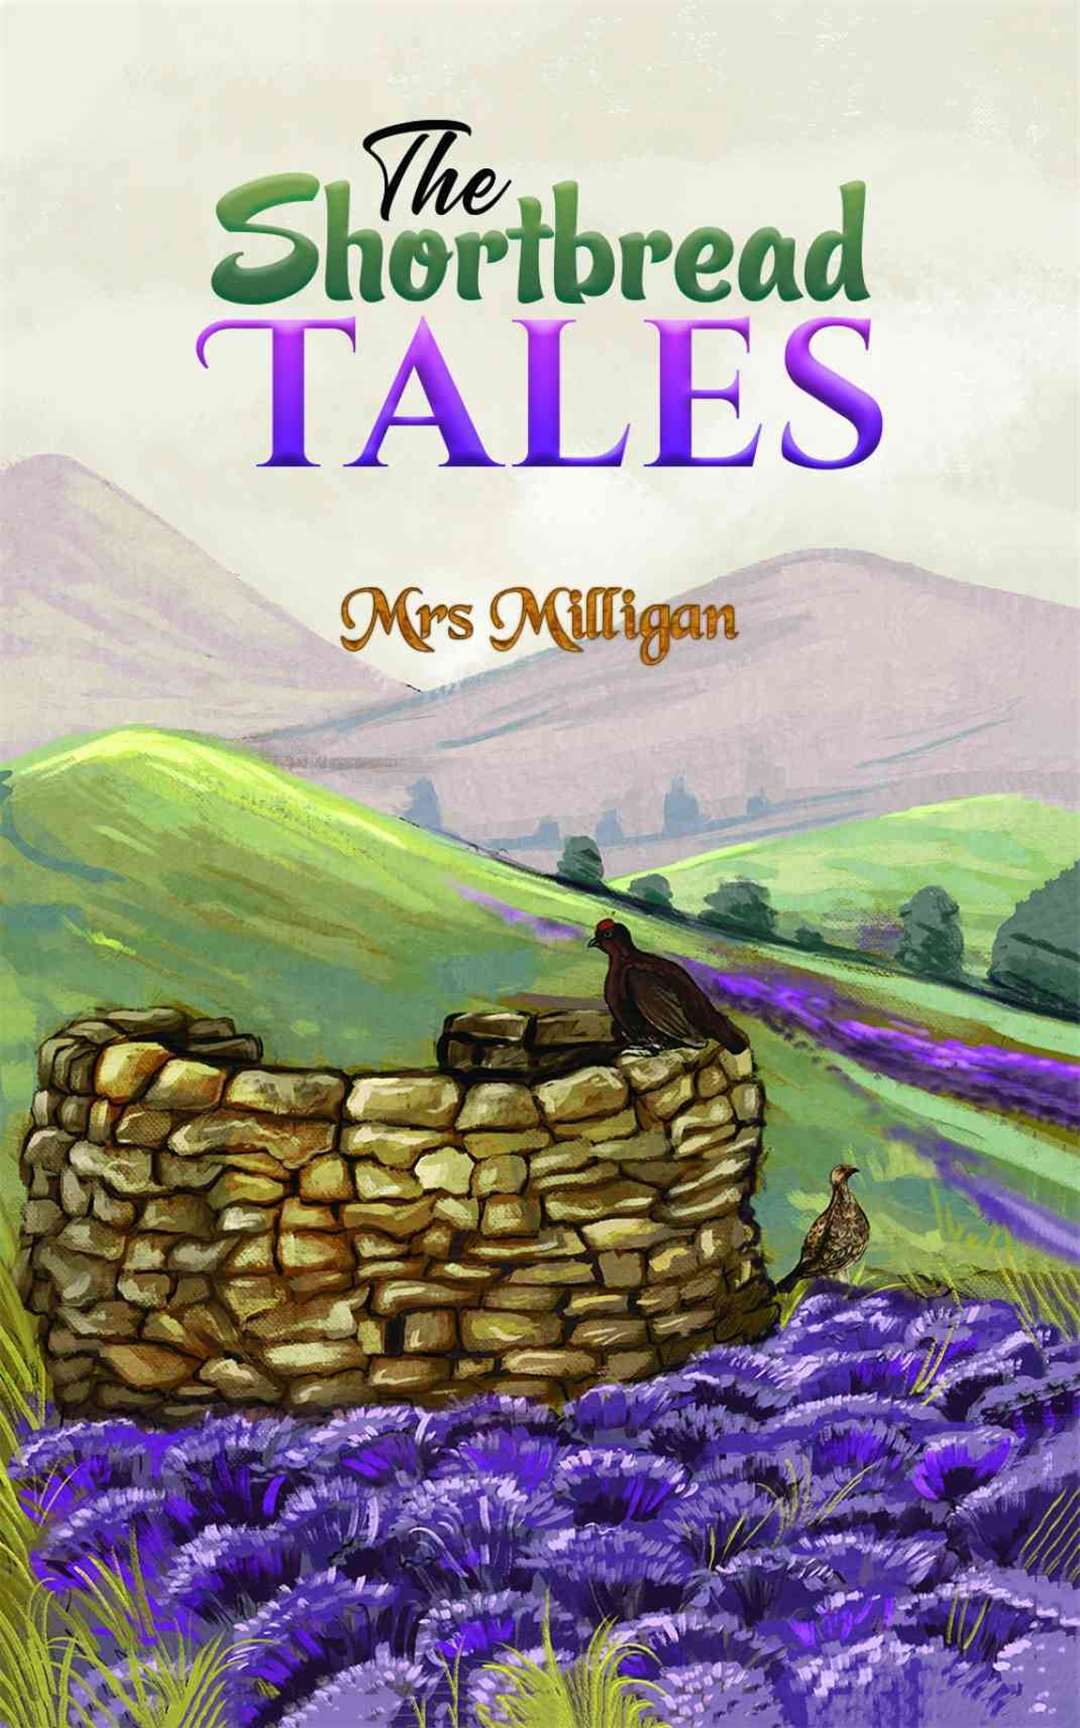 Mrs Milligan's first book: The Shortbread Tales